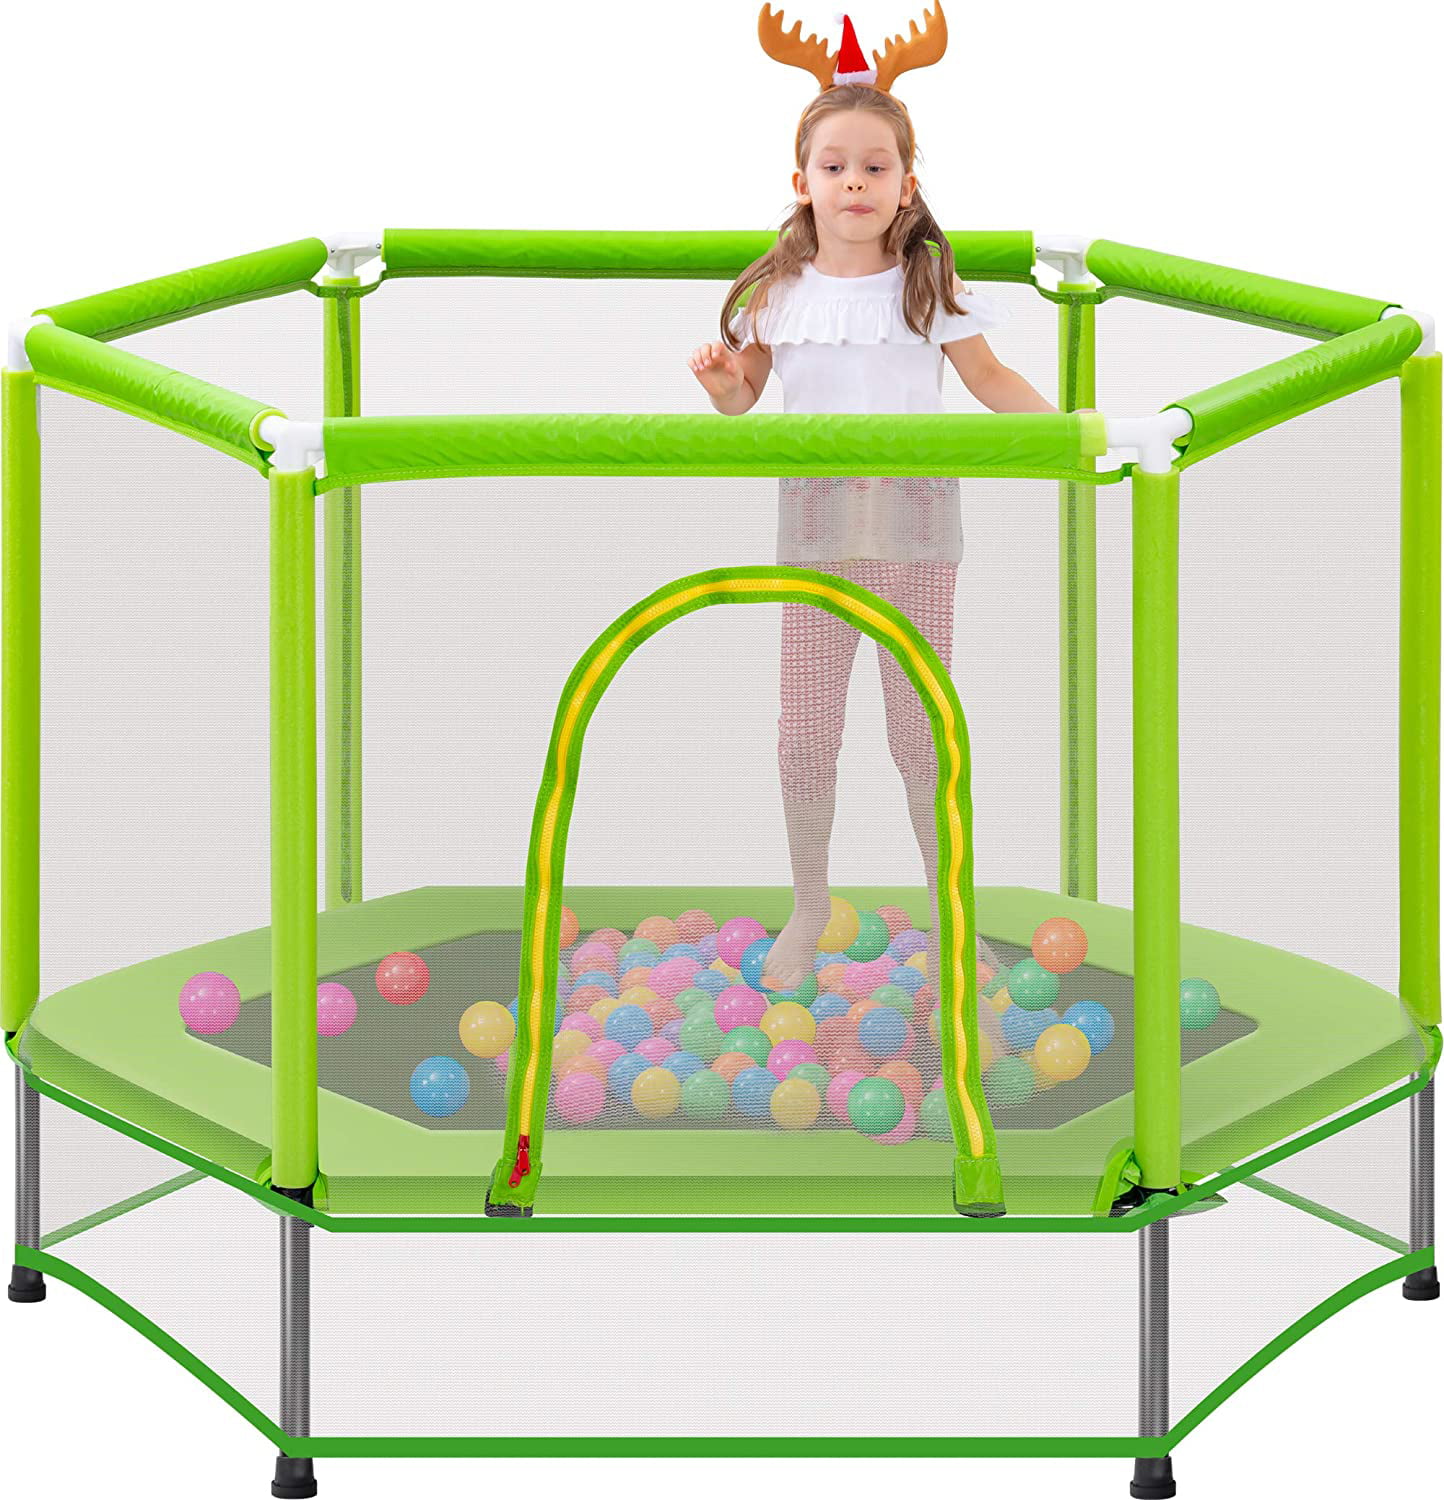 Children’s Mini Trampoline With Safety Net 4.5FT Kids Outdoor Indoor Toy Play 